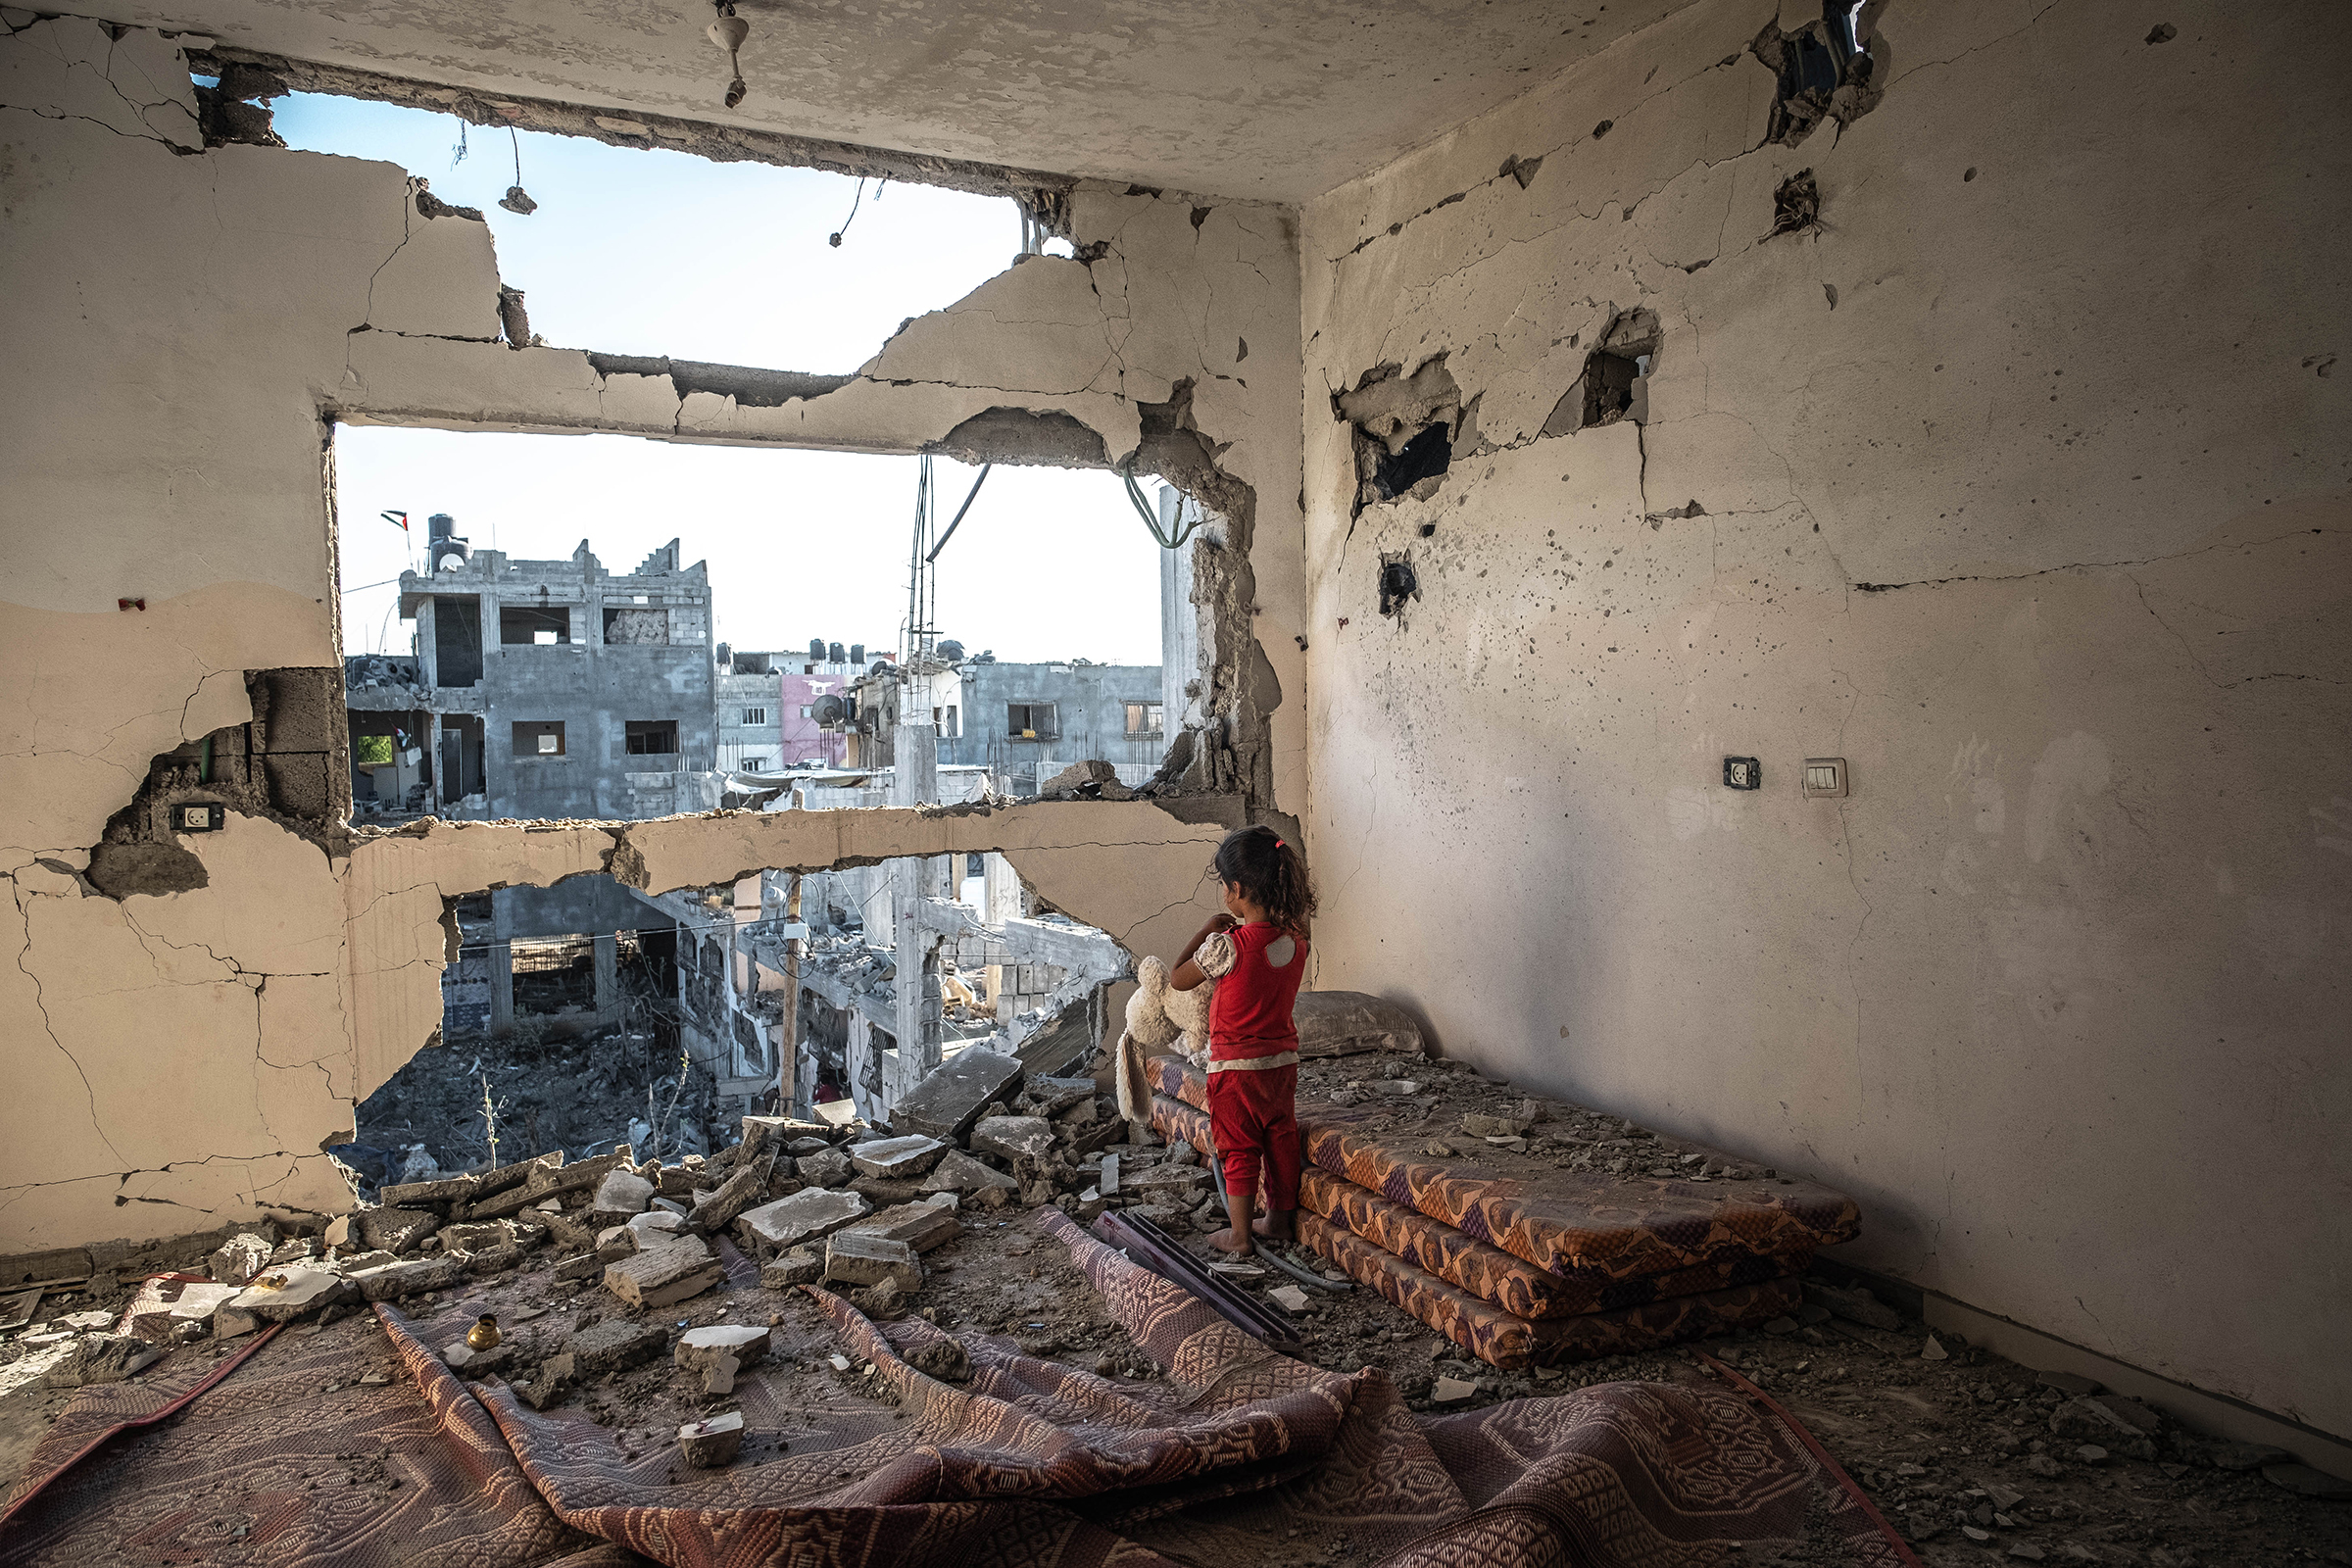 With a cease-fire in effect, a Palestinian girl stands in her destroyed home in Beit Hanoun, Gaza, on May 24. (Fatima Shbair—Getty Images)